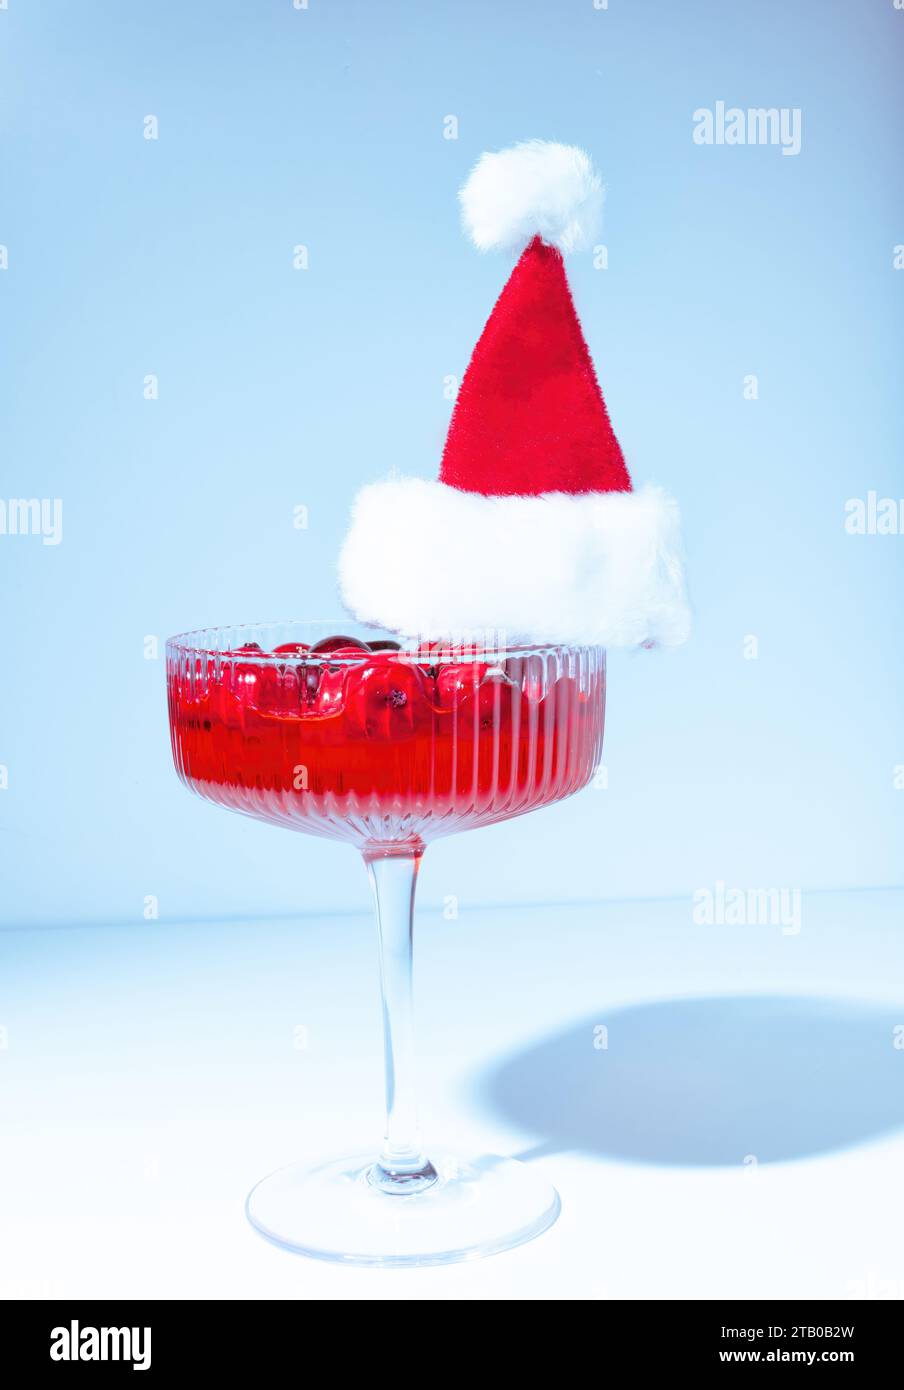 A Holiday Red Cranberry Cocktail in a Coupe Champagne Glass W earring a Furry Red Santa Claus Hat on a Blue Pastel Background Stock Photo